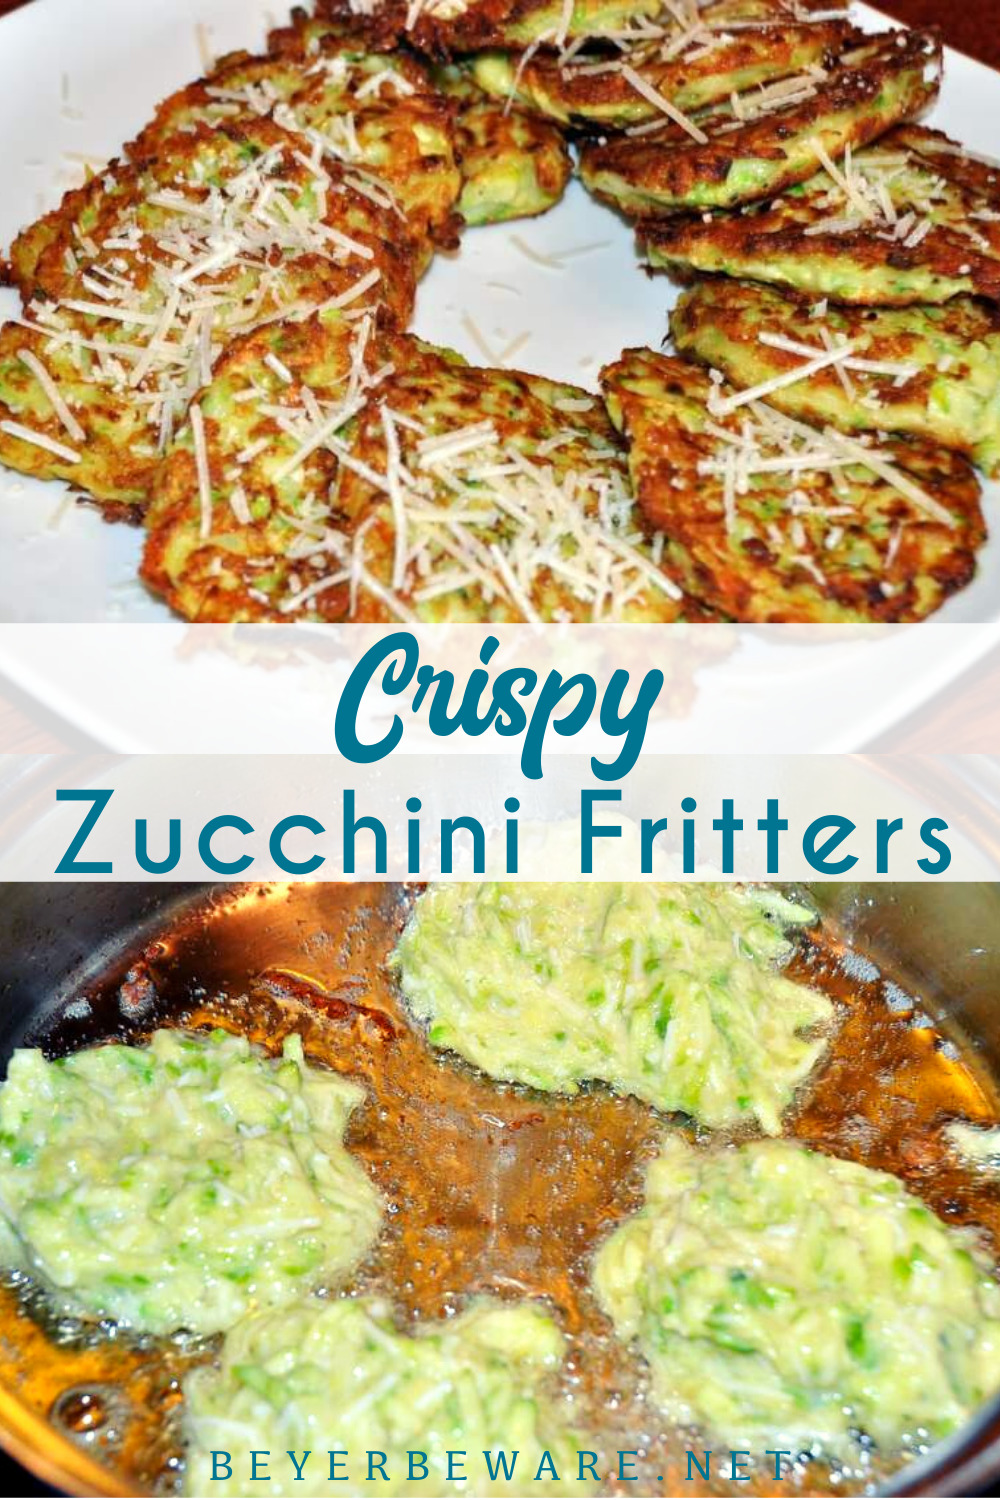 Crispy zucchini fritters are a simple recipe to use zucchini in a pan-fried fritter that even people who aren't vegetable lovers will eat. Put some ranch on the side to dip these zucchini fritters in and everyone will love this finger food.